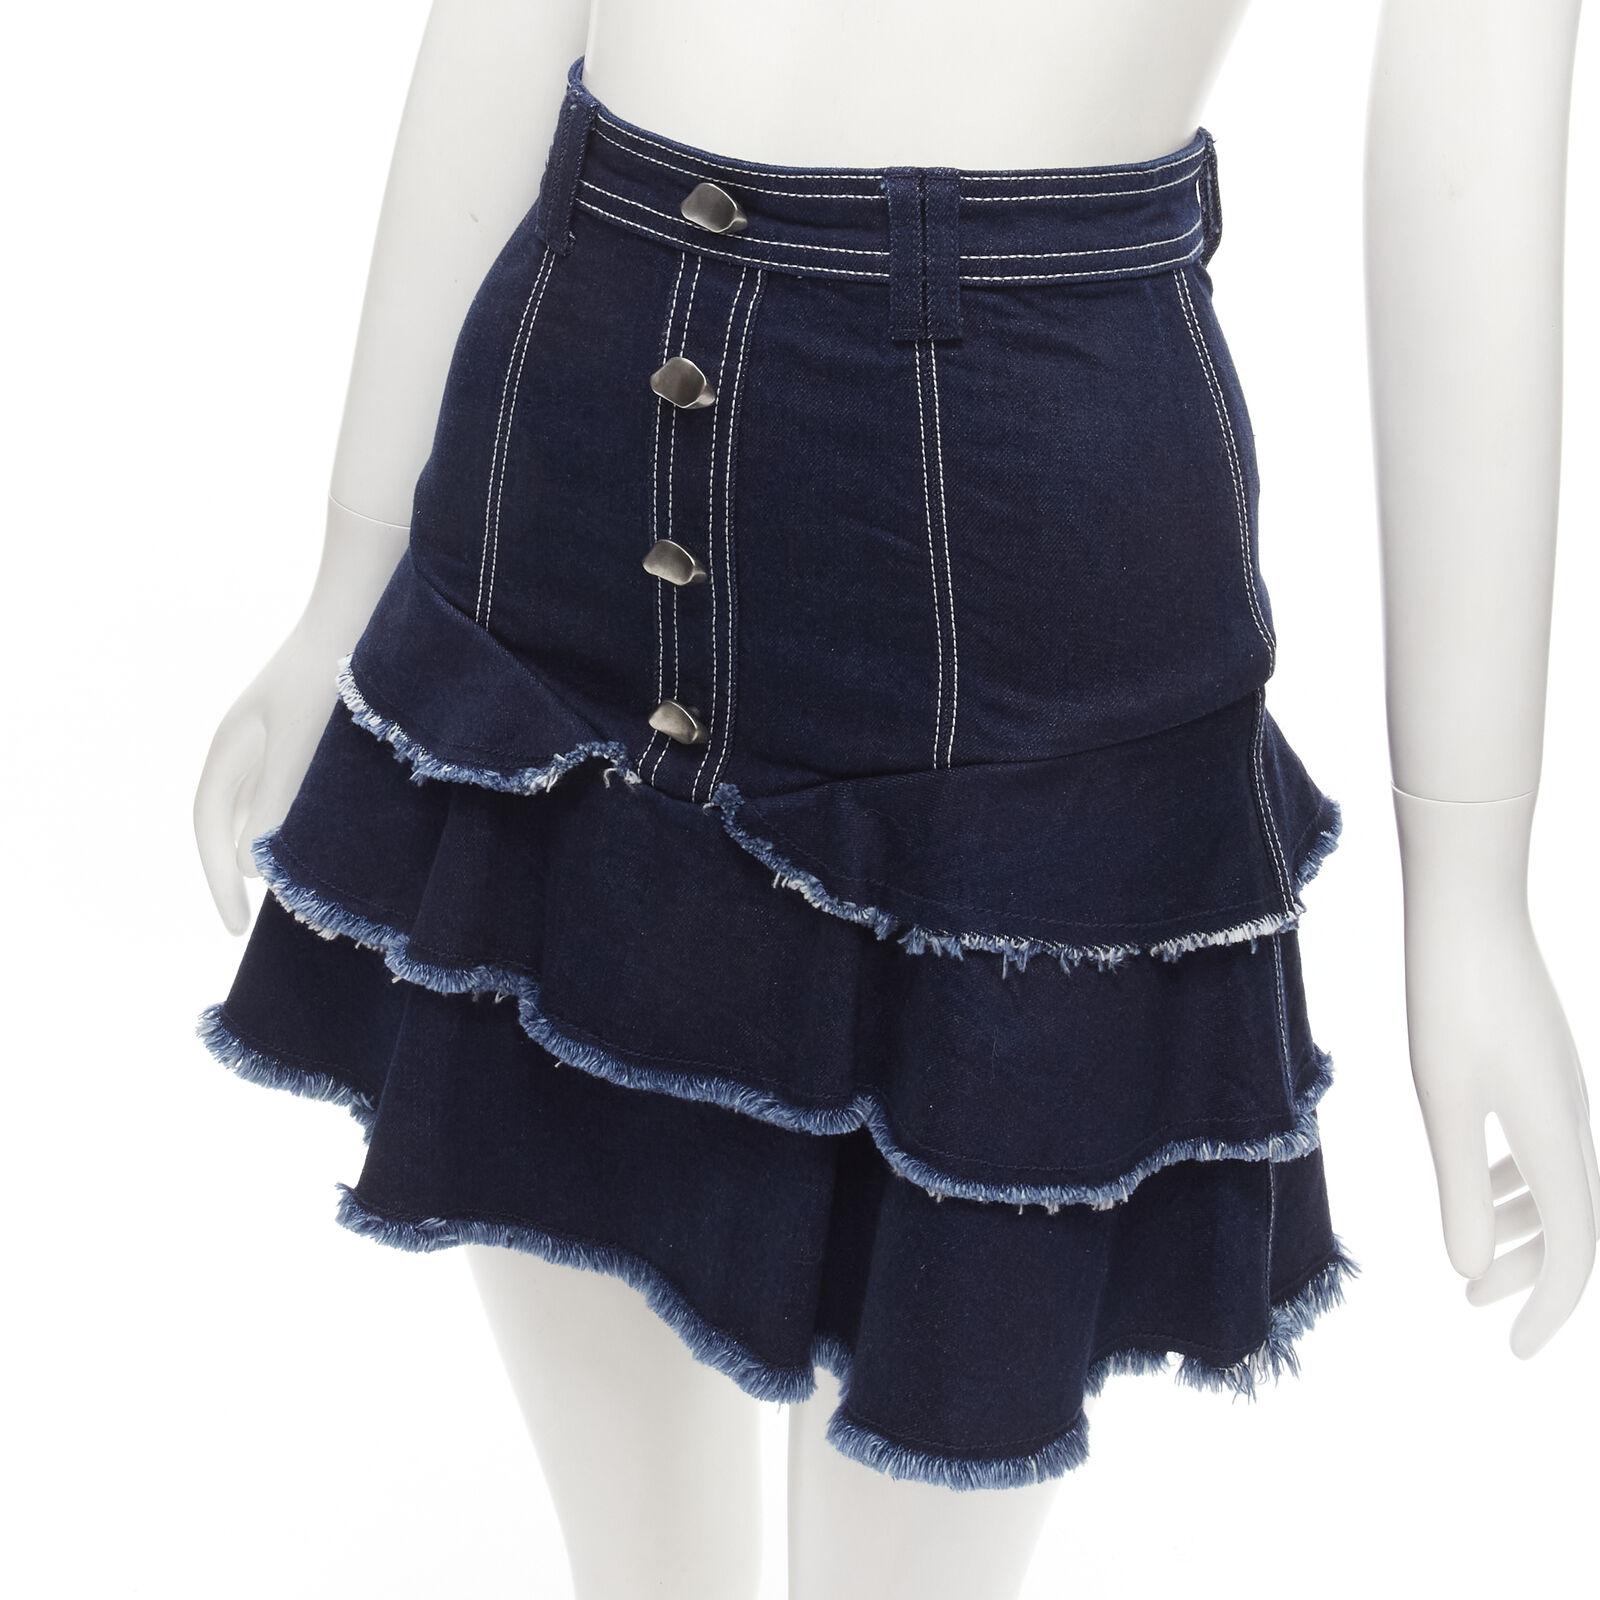 AJE hammered silver buttons blue frayed edge tiered denim skirt UK6 XS
Reference: AAWC/A00442
Brand: Aje
Material: Denim
Color: Blue
Pattern: Solid
Closure: Zip Fly
Made in: China

CONDITION:
Condition: Excellent, this item was pre-owned and is in